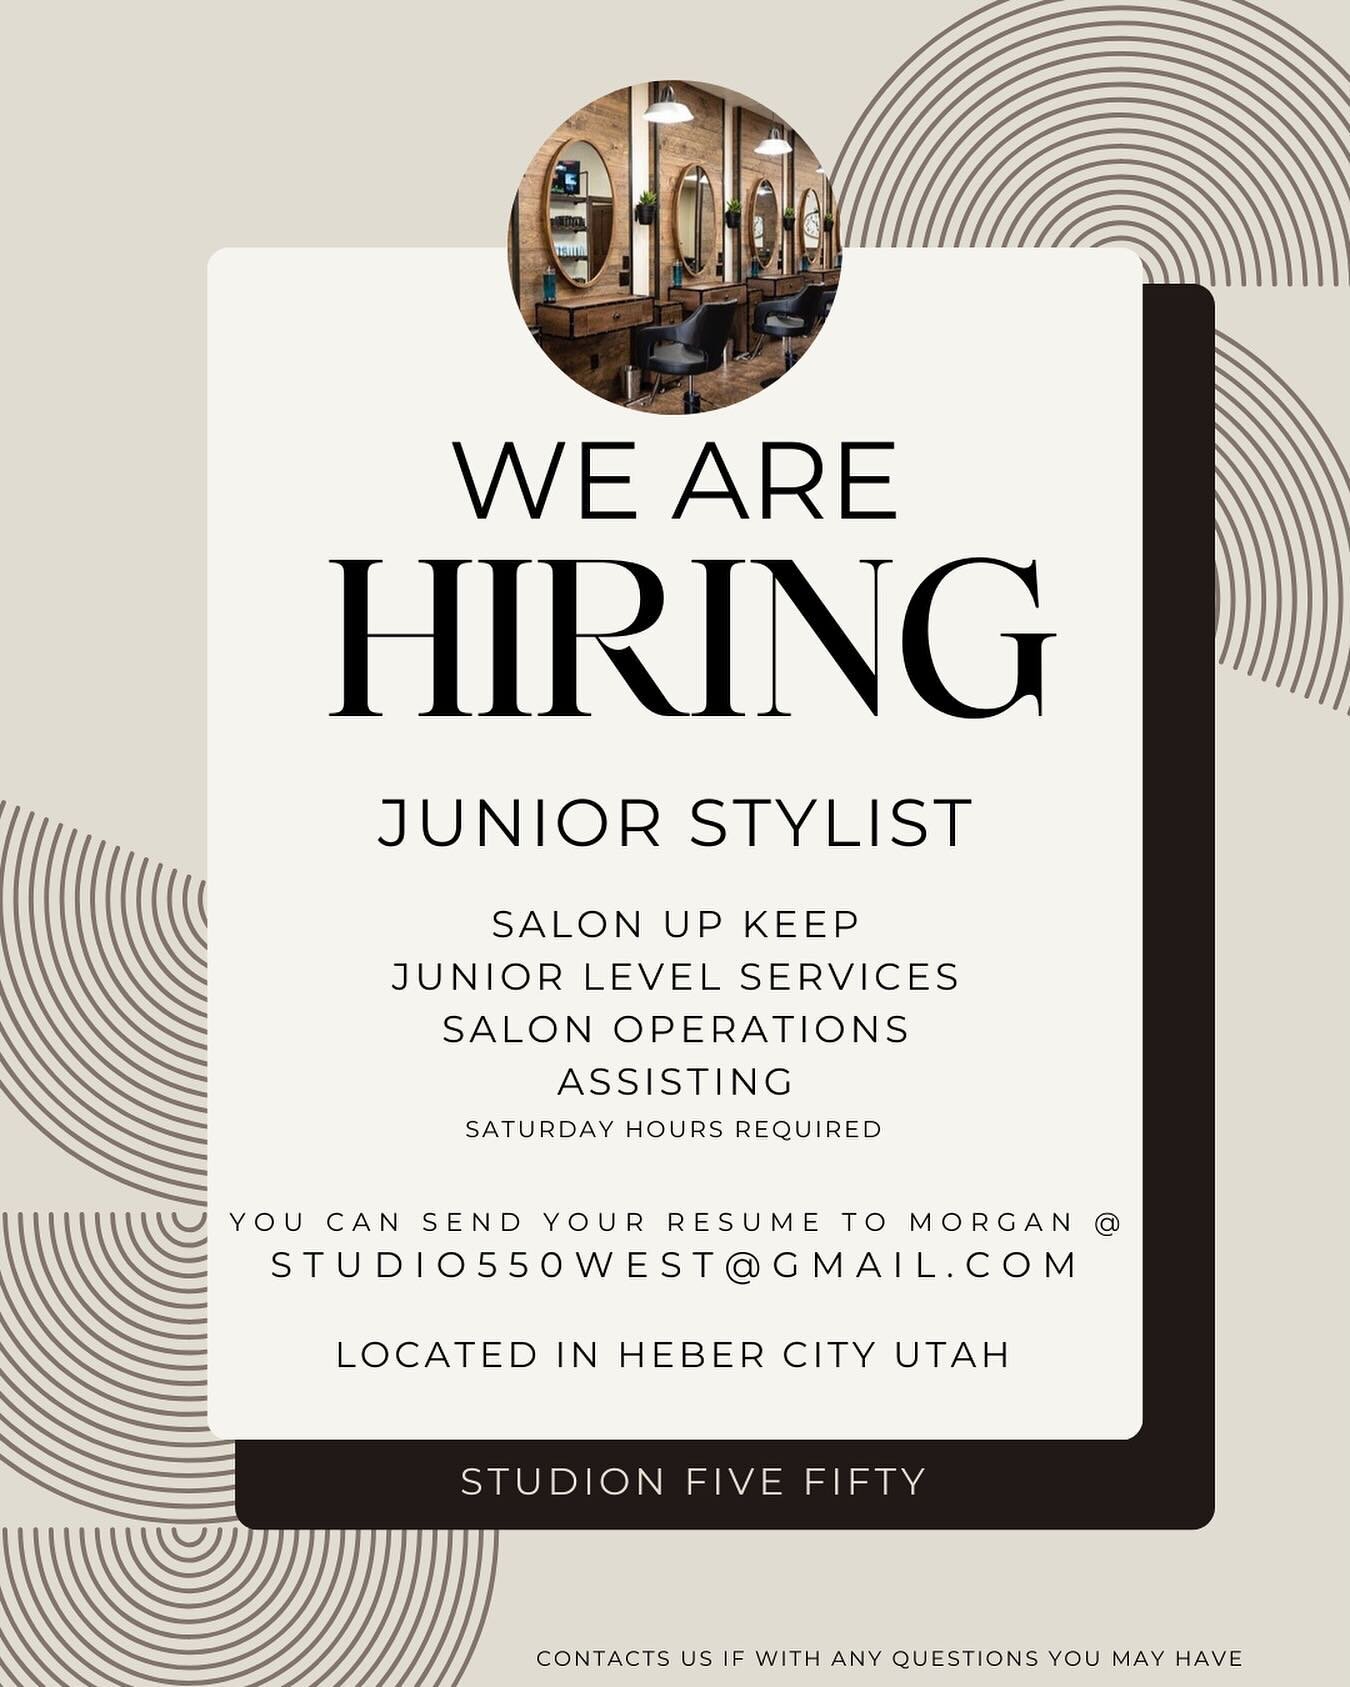 Join our team!! 

We are looking for a Junior Stylist to take junior level appointments, assist master stylists, help with salon upkeep, and salon operations!

We would love to hear from you! Message us with any questions you may have 🫶🏼

#utahhair